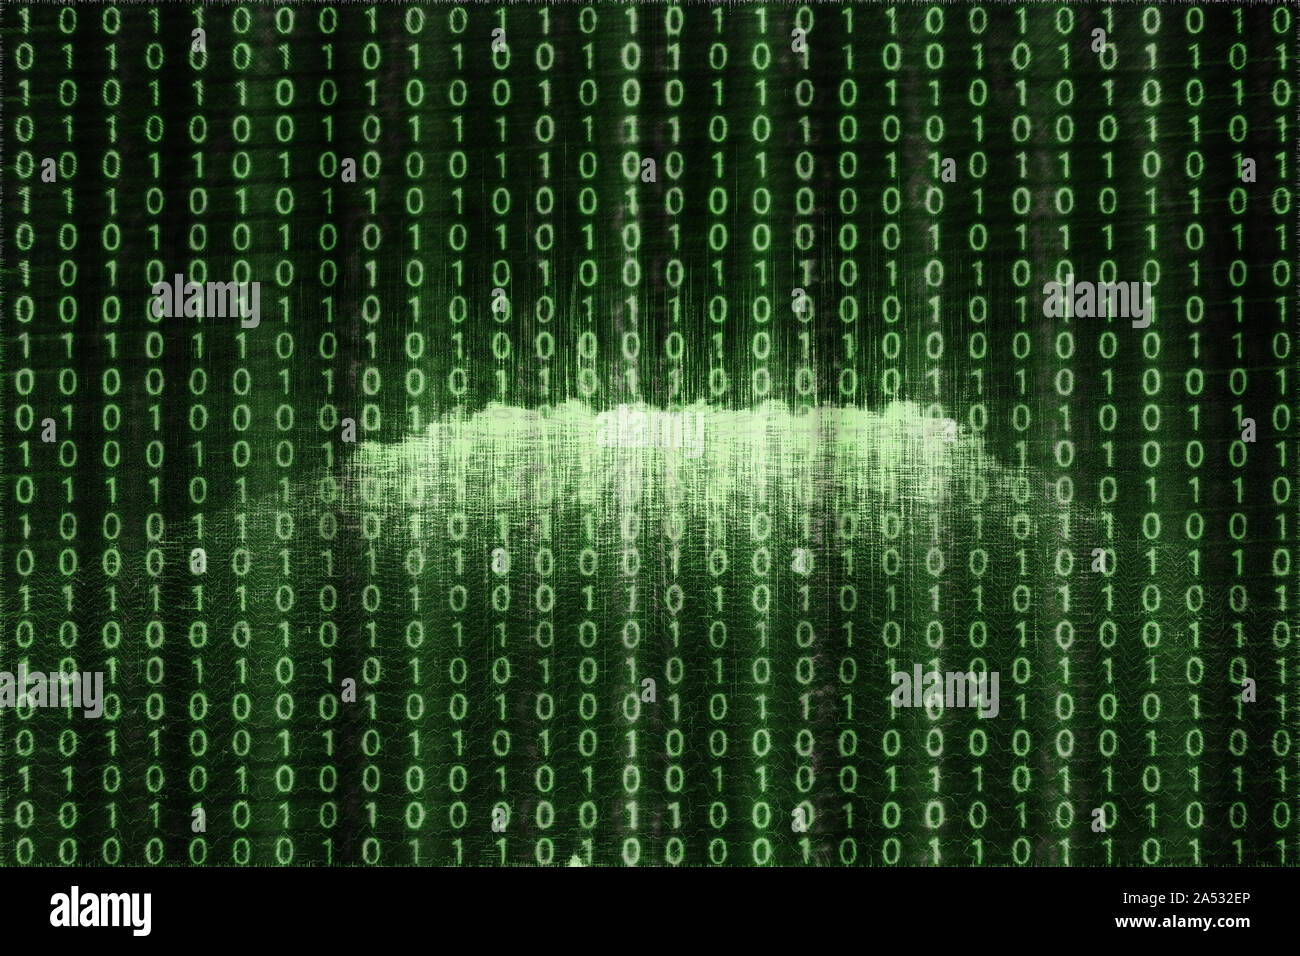 An abstract green and black binary code background image. Stock Photo